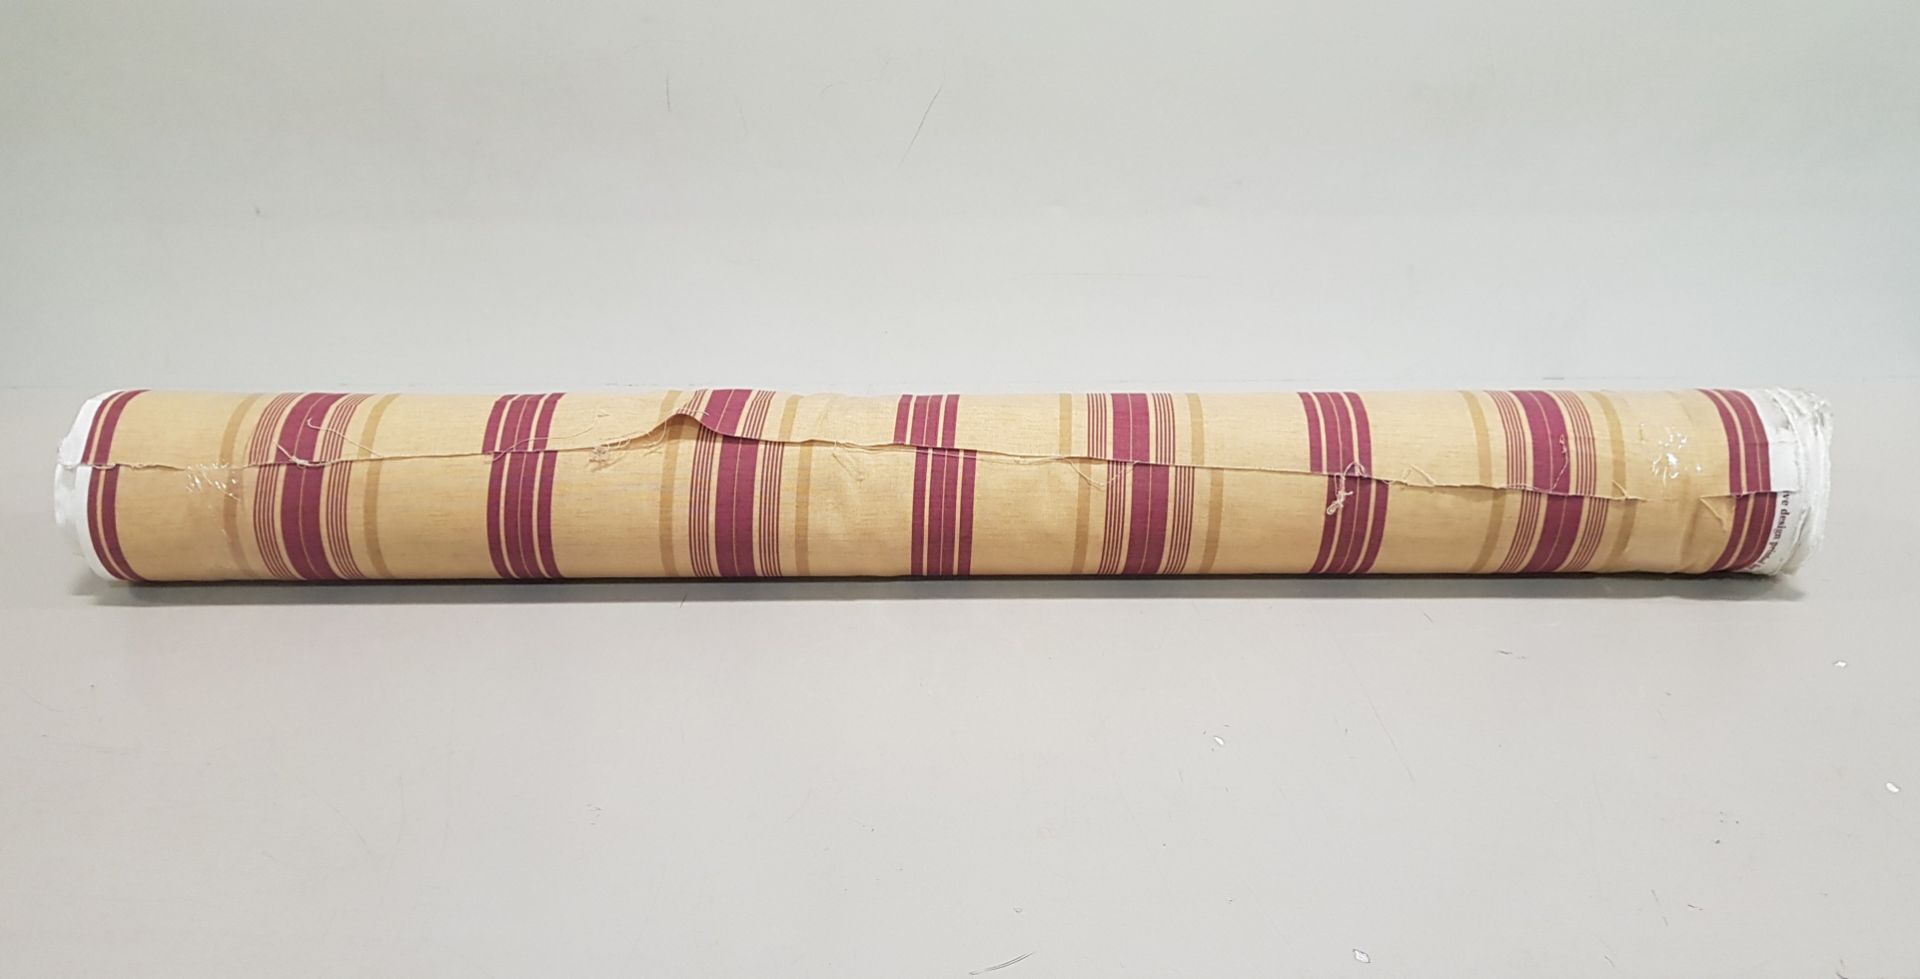 1 X ROLL OF FABRIC IN BROWN AND RED LINED DESIGN - THE LENGTH 43M - £12.99 / M - TOTAL £558.57